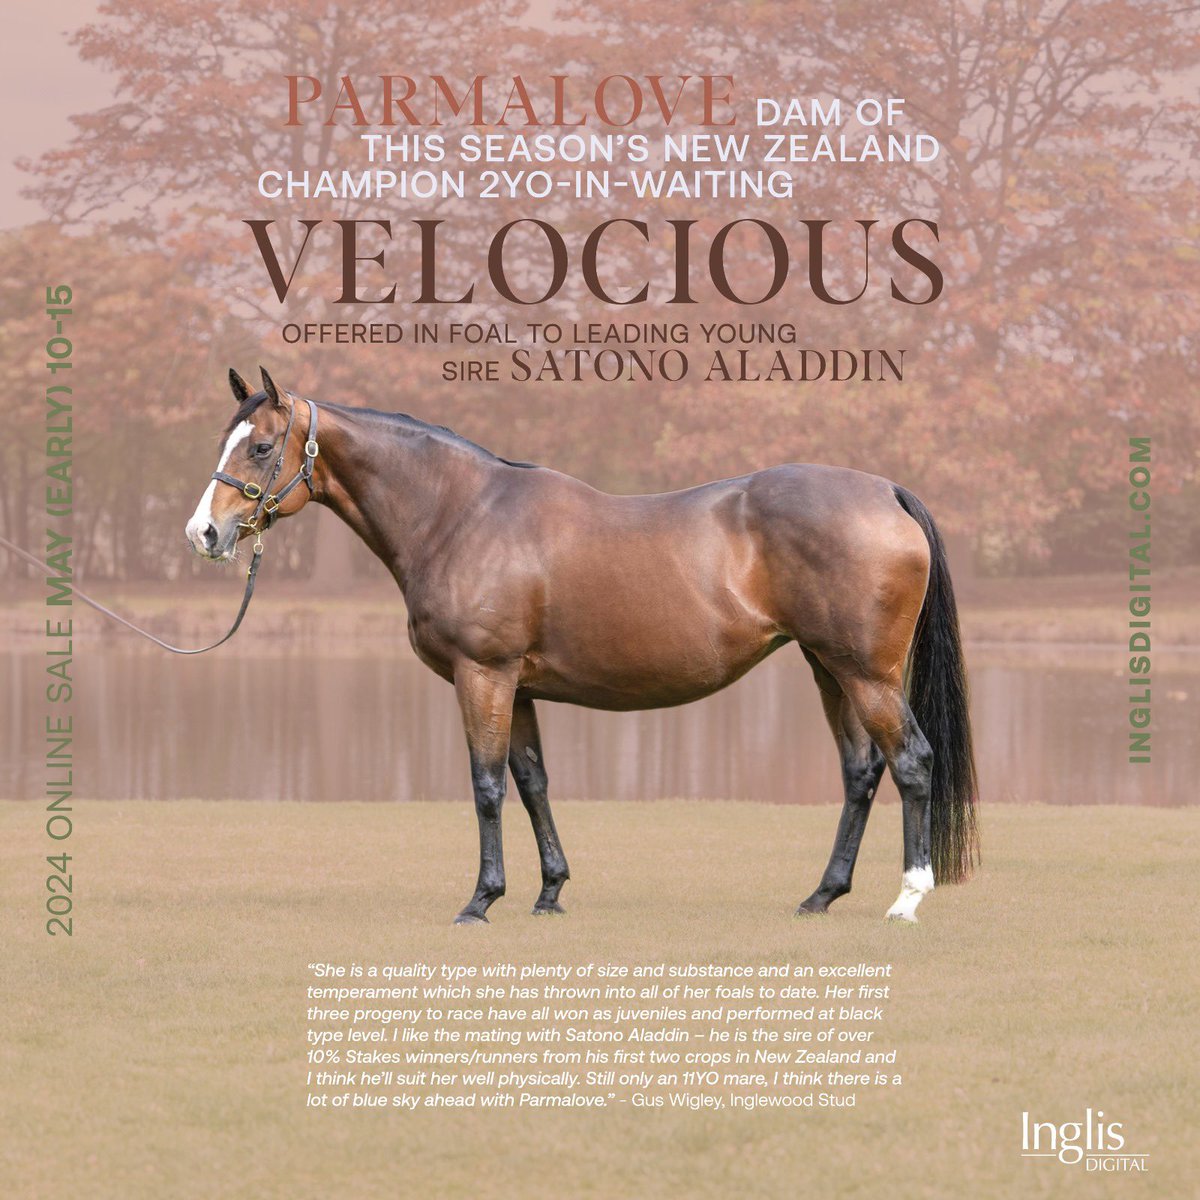 What an opportunity! Dam of this season’s New Zealand champion 2YO-in-waiting Velocious, PARMALOVE, is a highlight in the current #InglisDigital sale. She’s offered in foal to leading young sire Satono Aladdin. View the listing here: bit.ly/3Uu2N5S